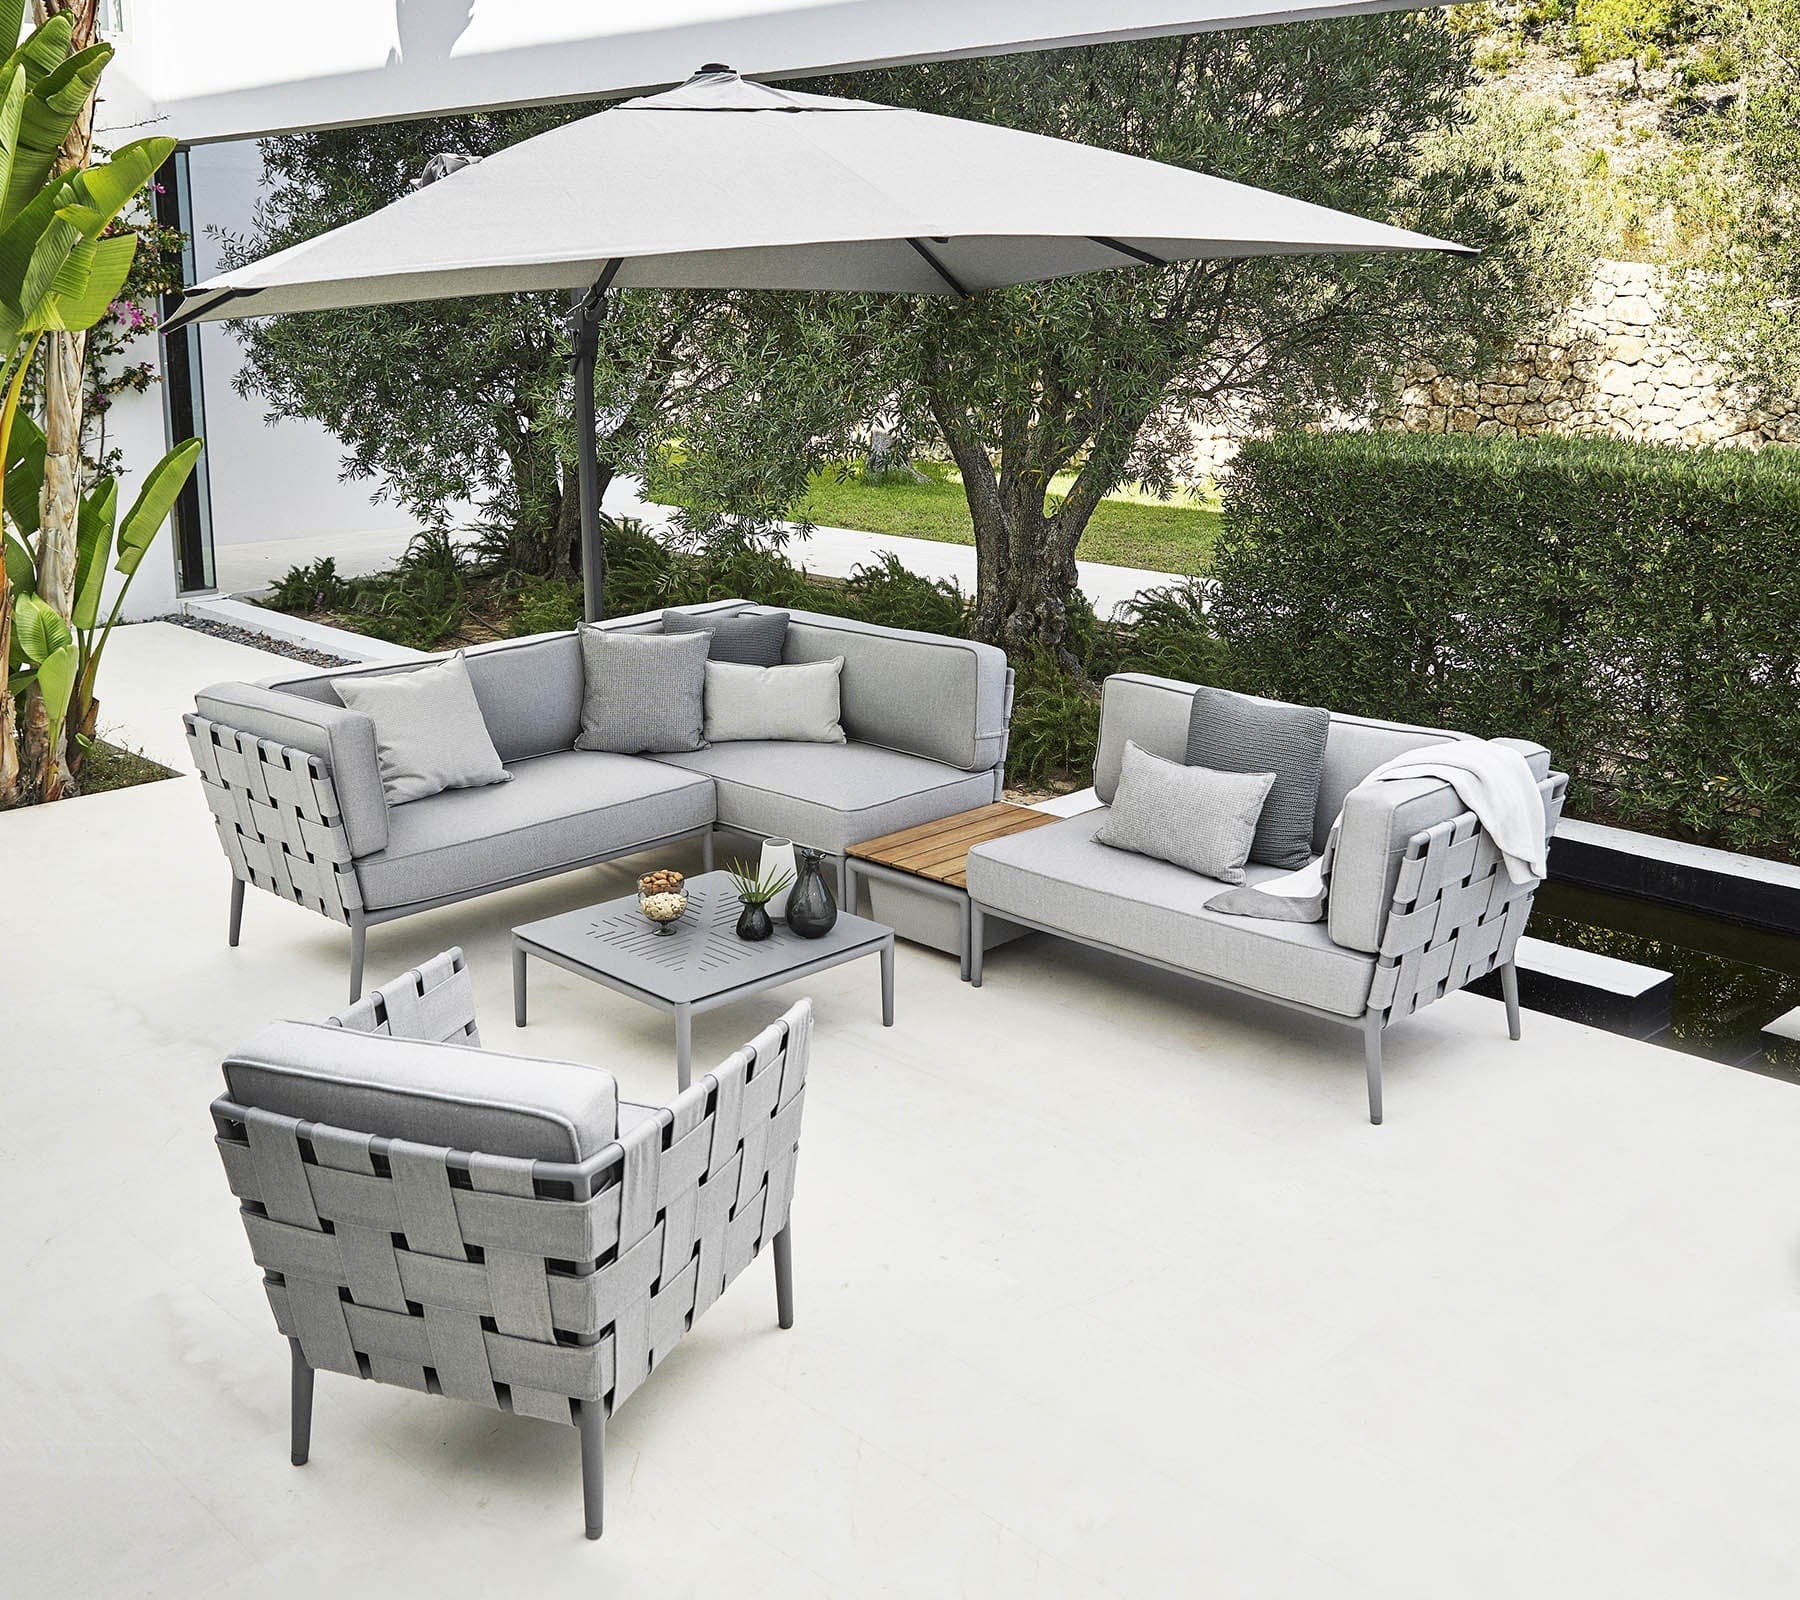 Boxhill's Conic 2-Seater Right Module Sofa Light Grey lifestyle image with big umbrella sunshade at patio